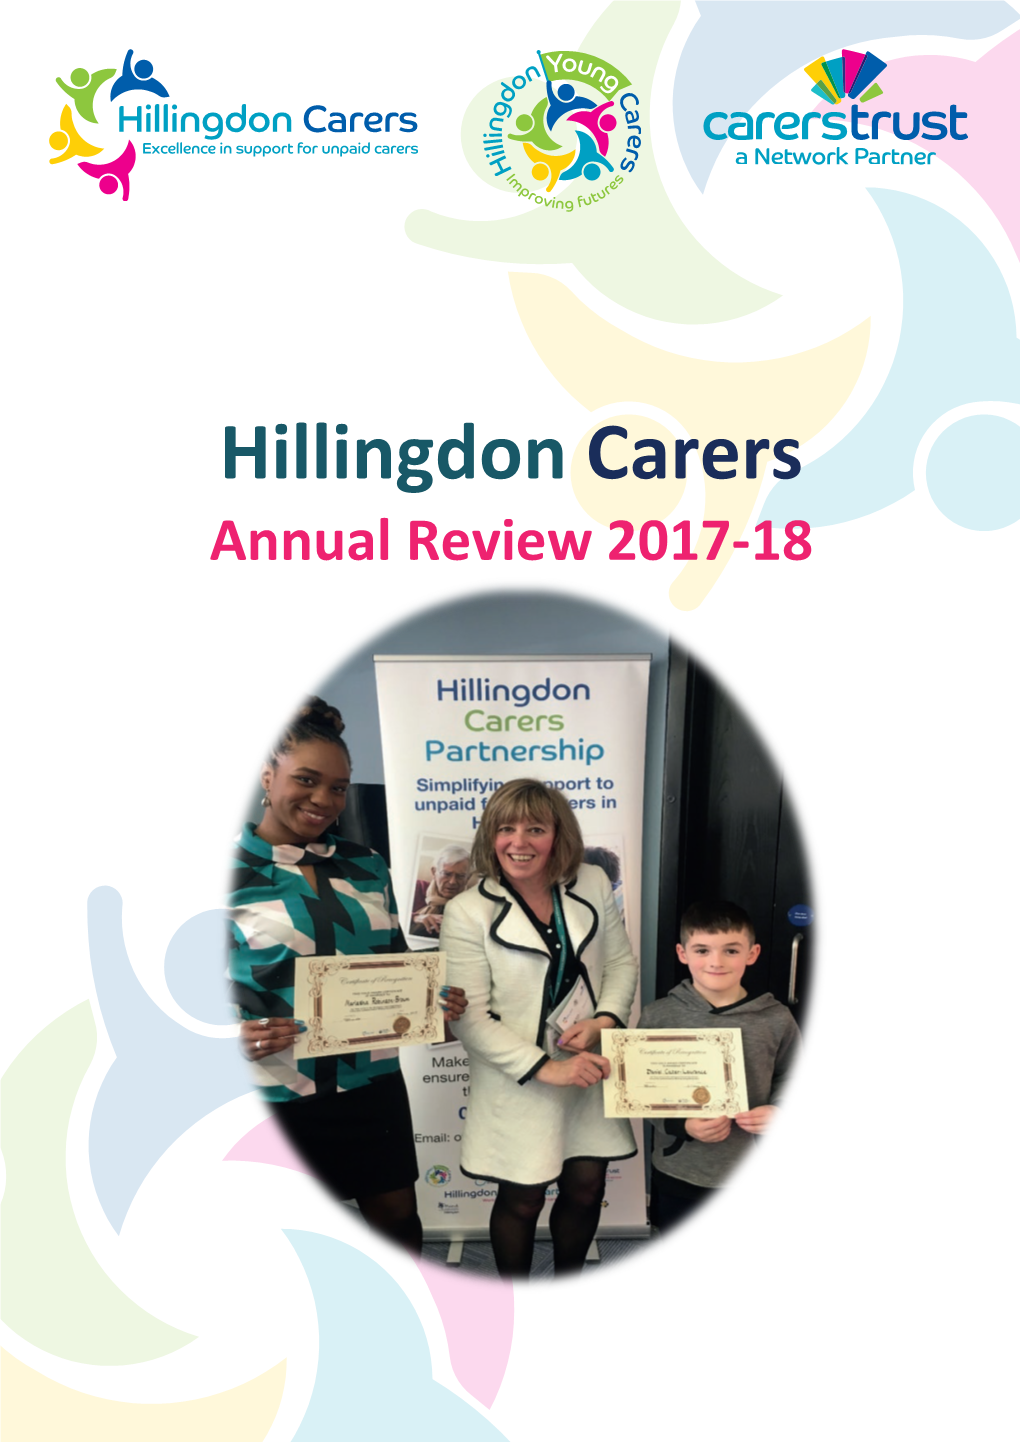 Hillingdon Carers Annual Review 2017-18